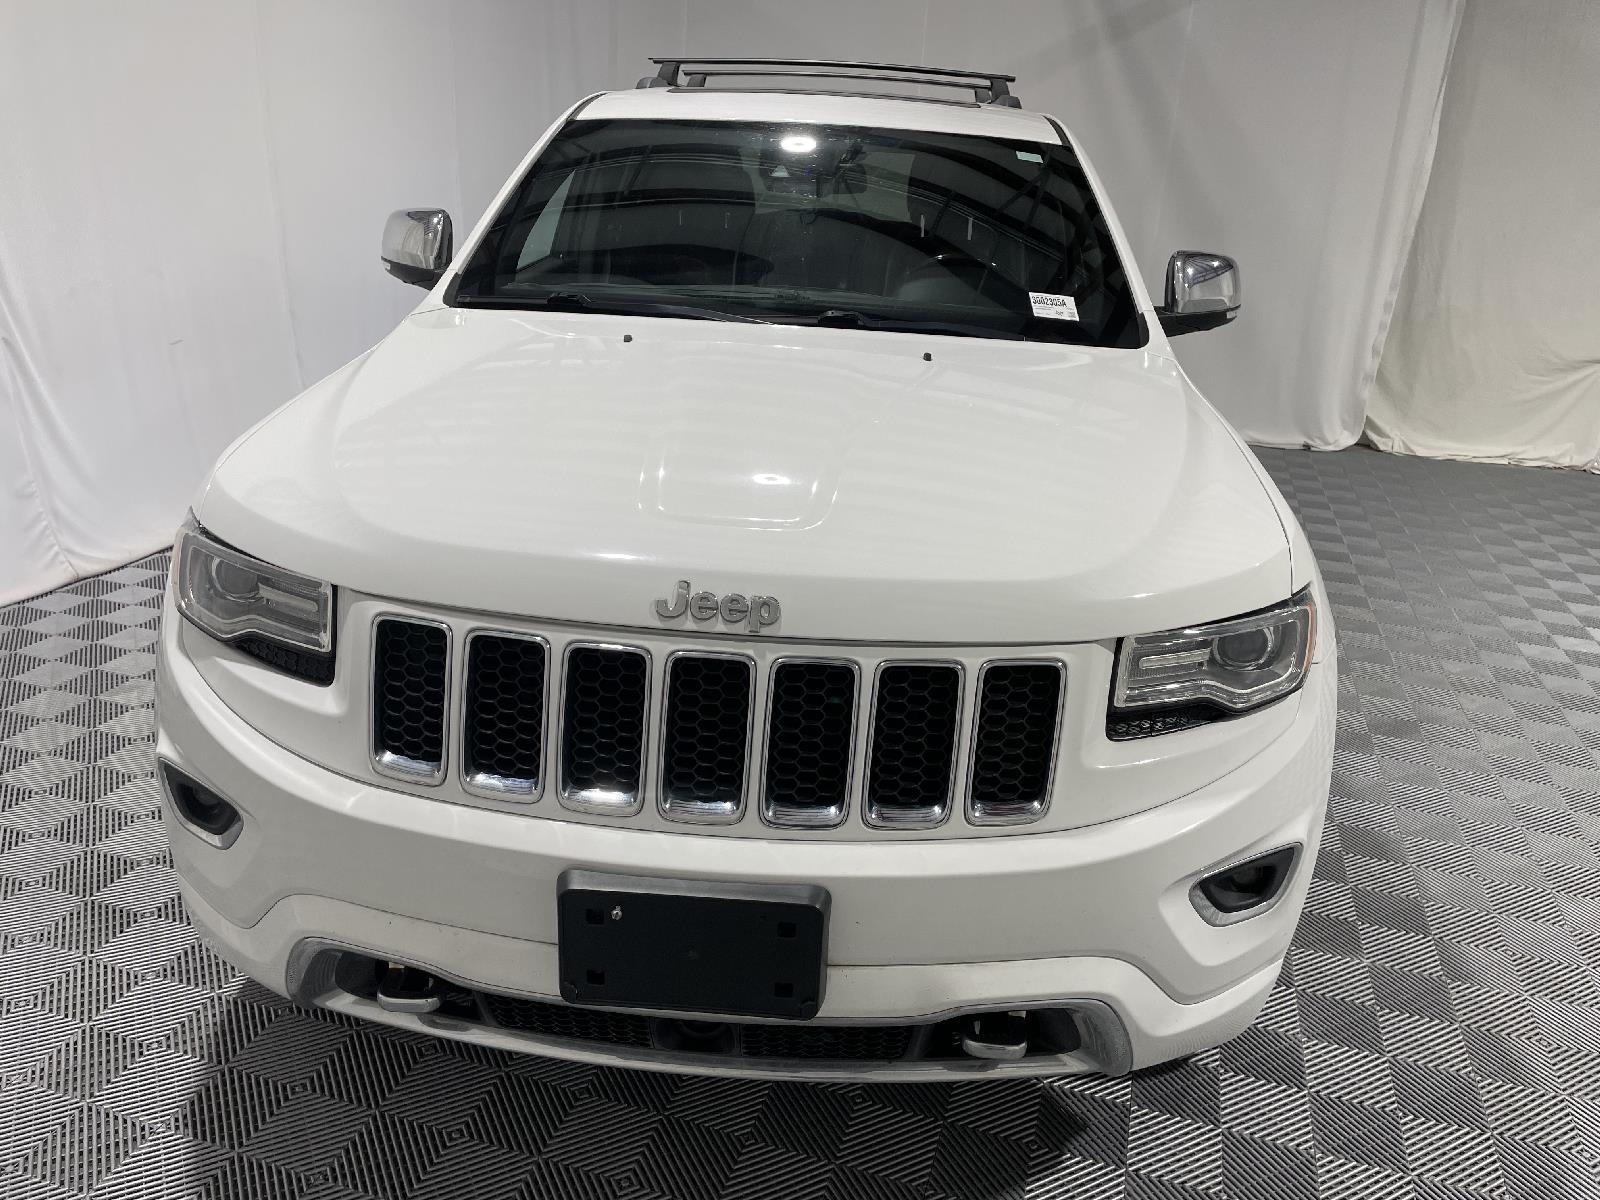 Used 2014 Jeep Grand Cherokee Overland SUV for sale in St Joseph MO